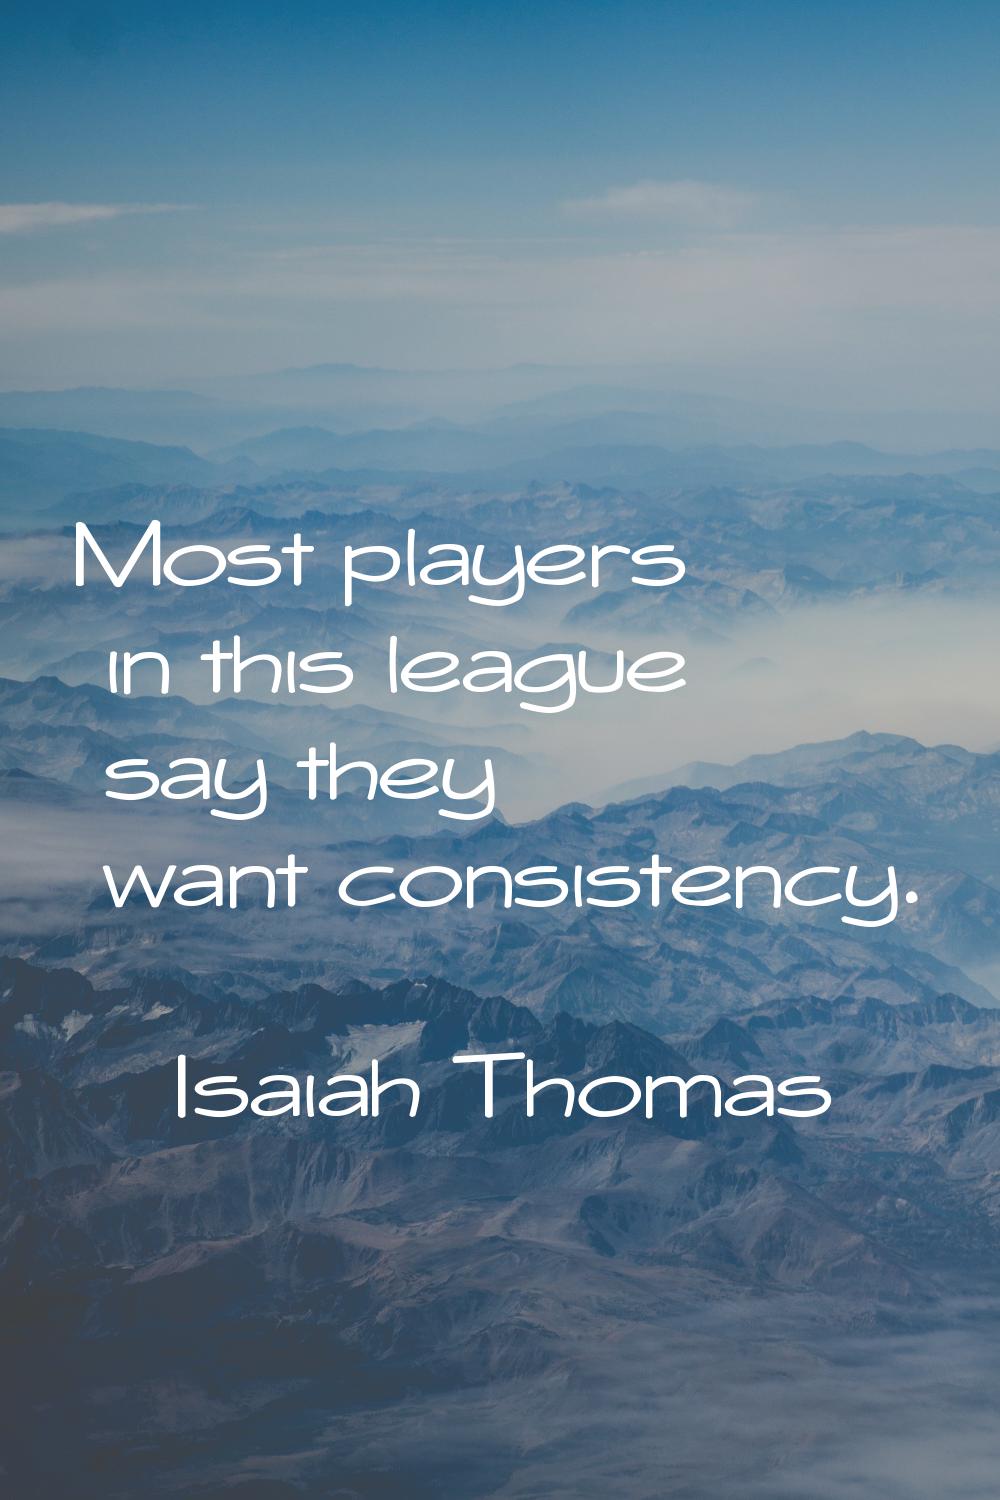 Most players in this league say they want consistency.